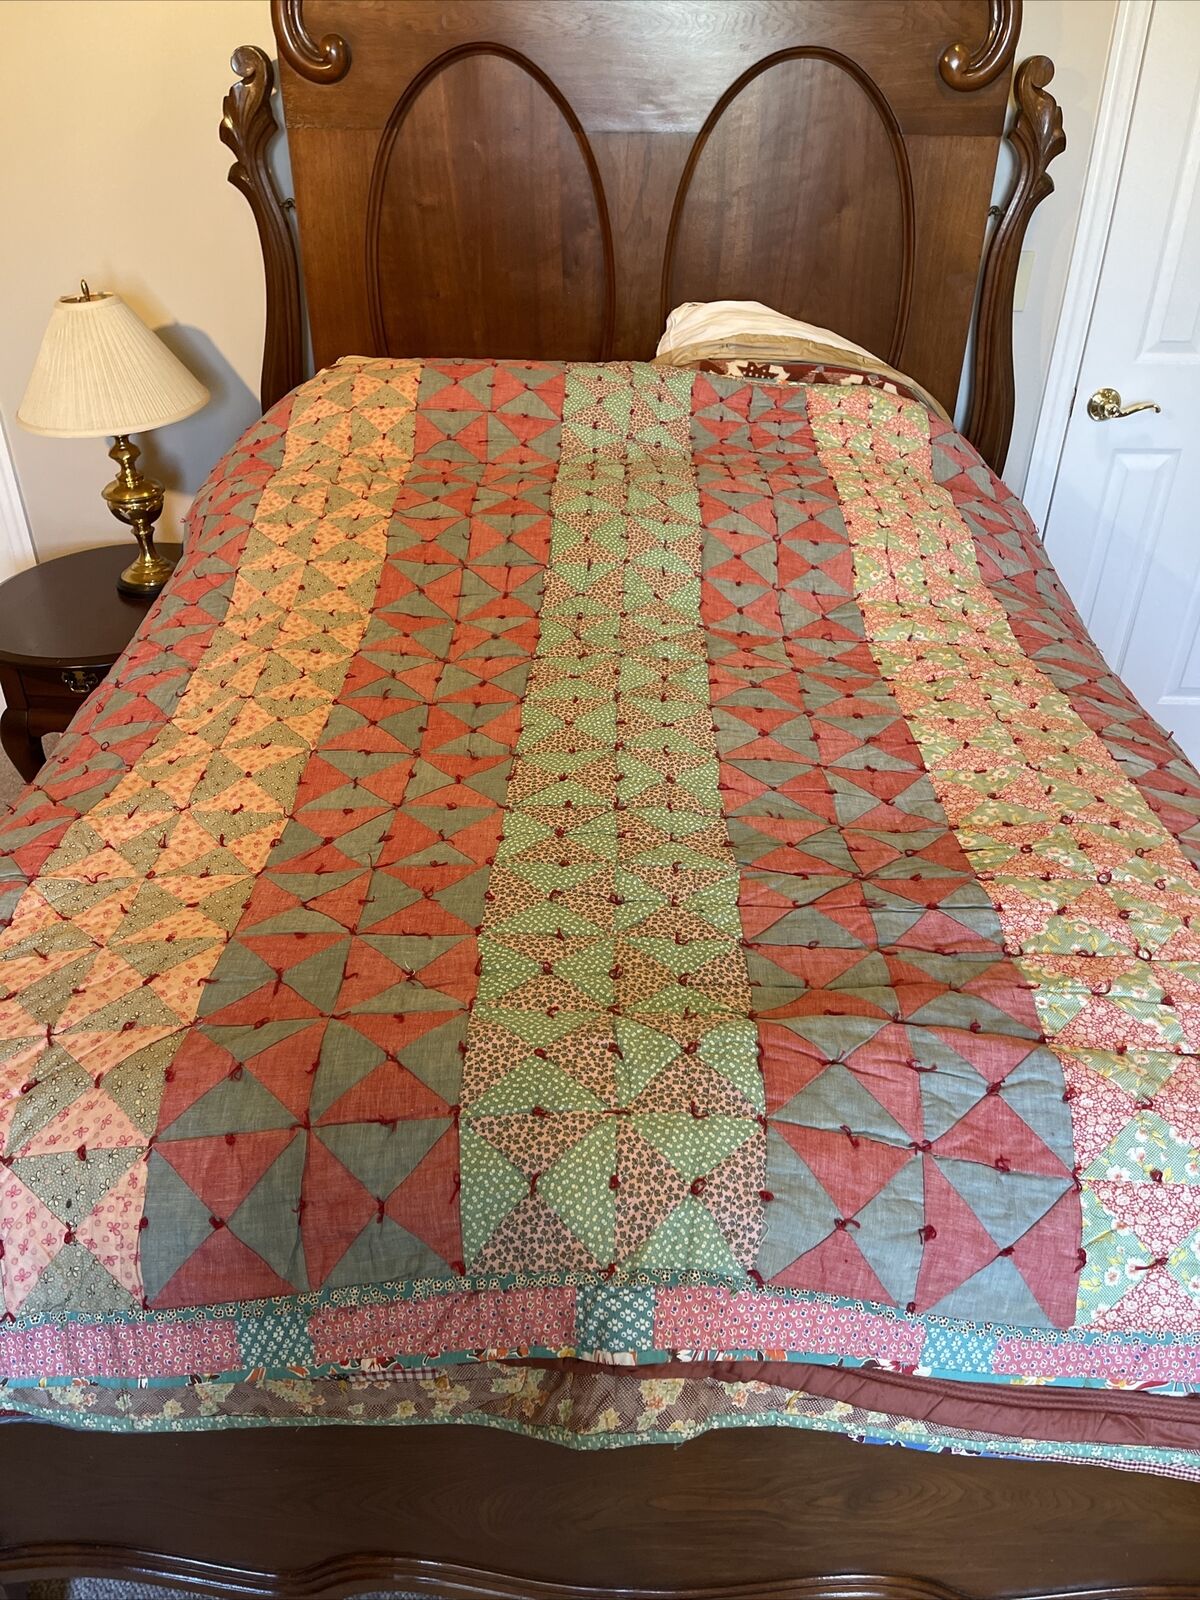 vintage handmade quilt Comforter 74 x 68 have a multi colored squares early 1900